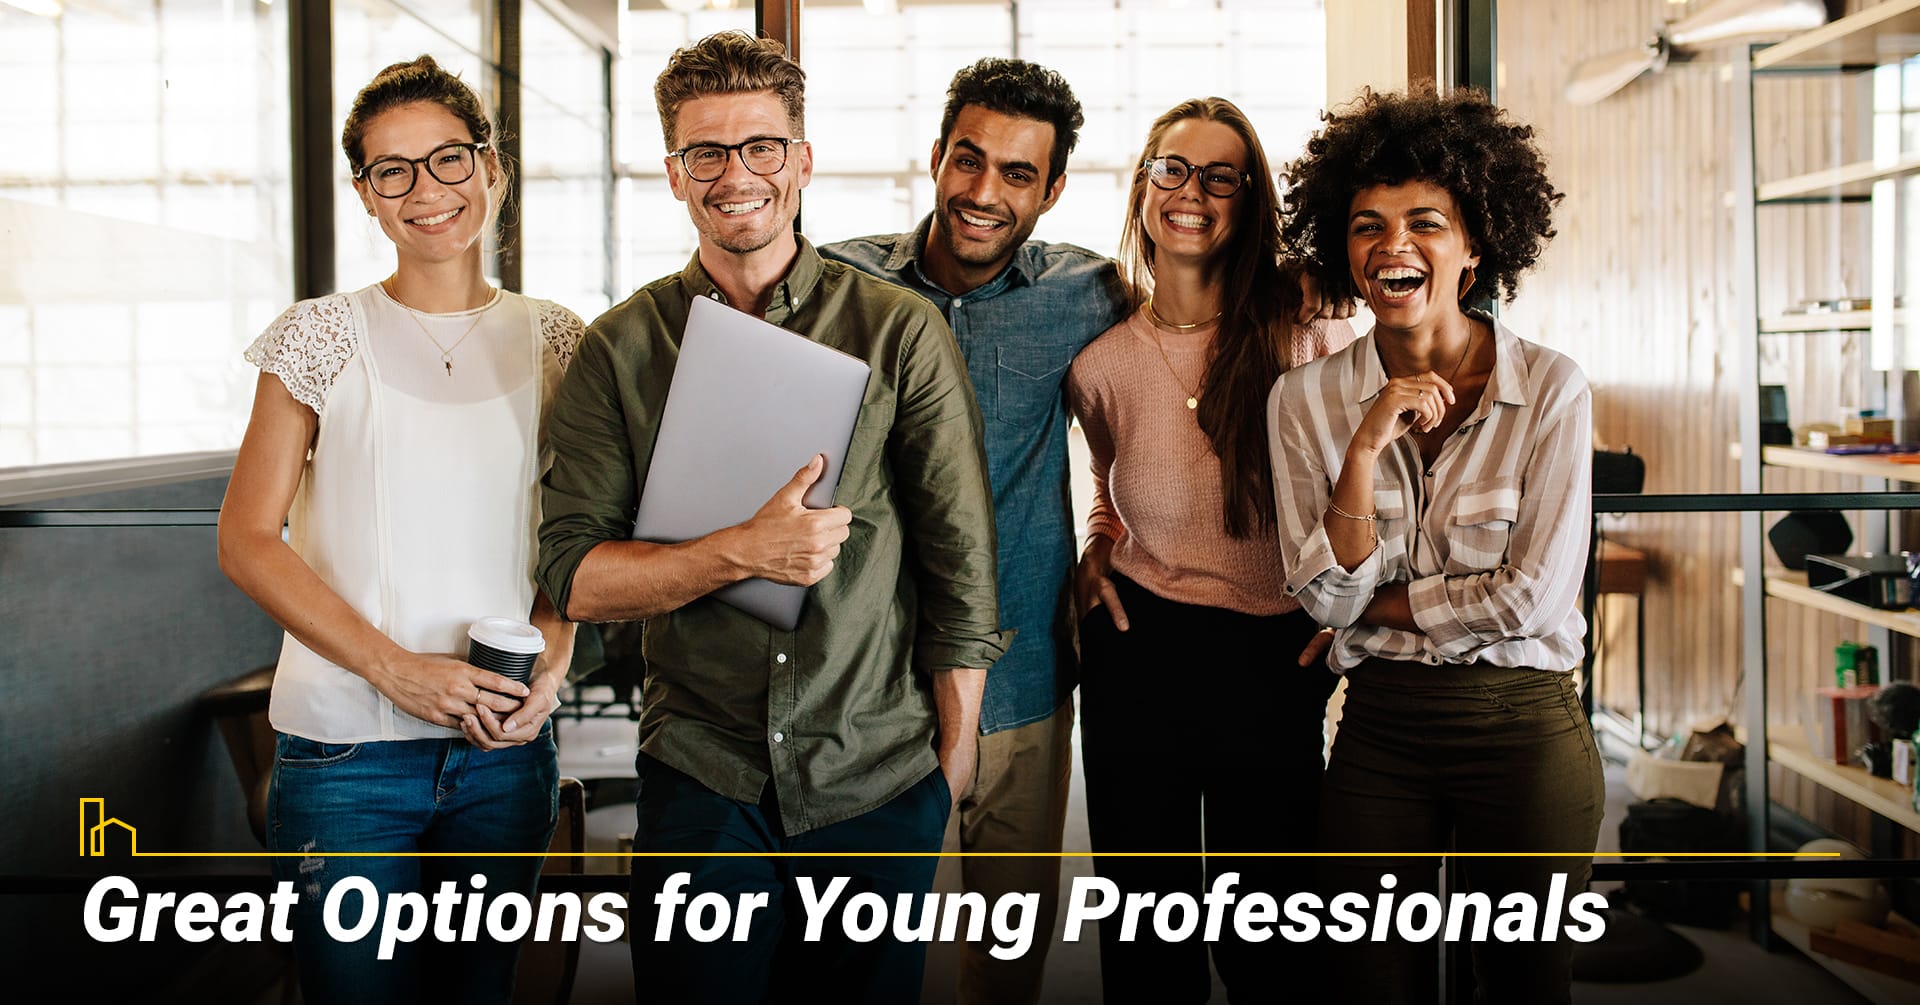 Great Options for Young Professionals